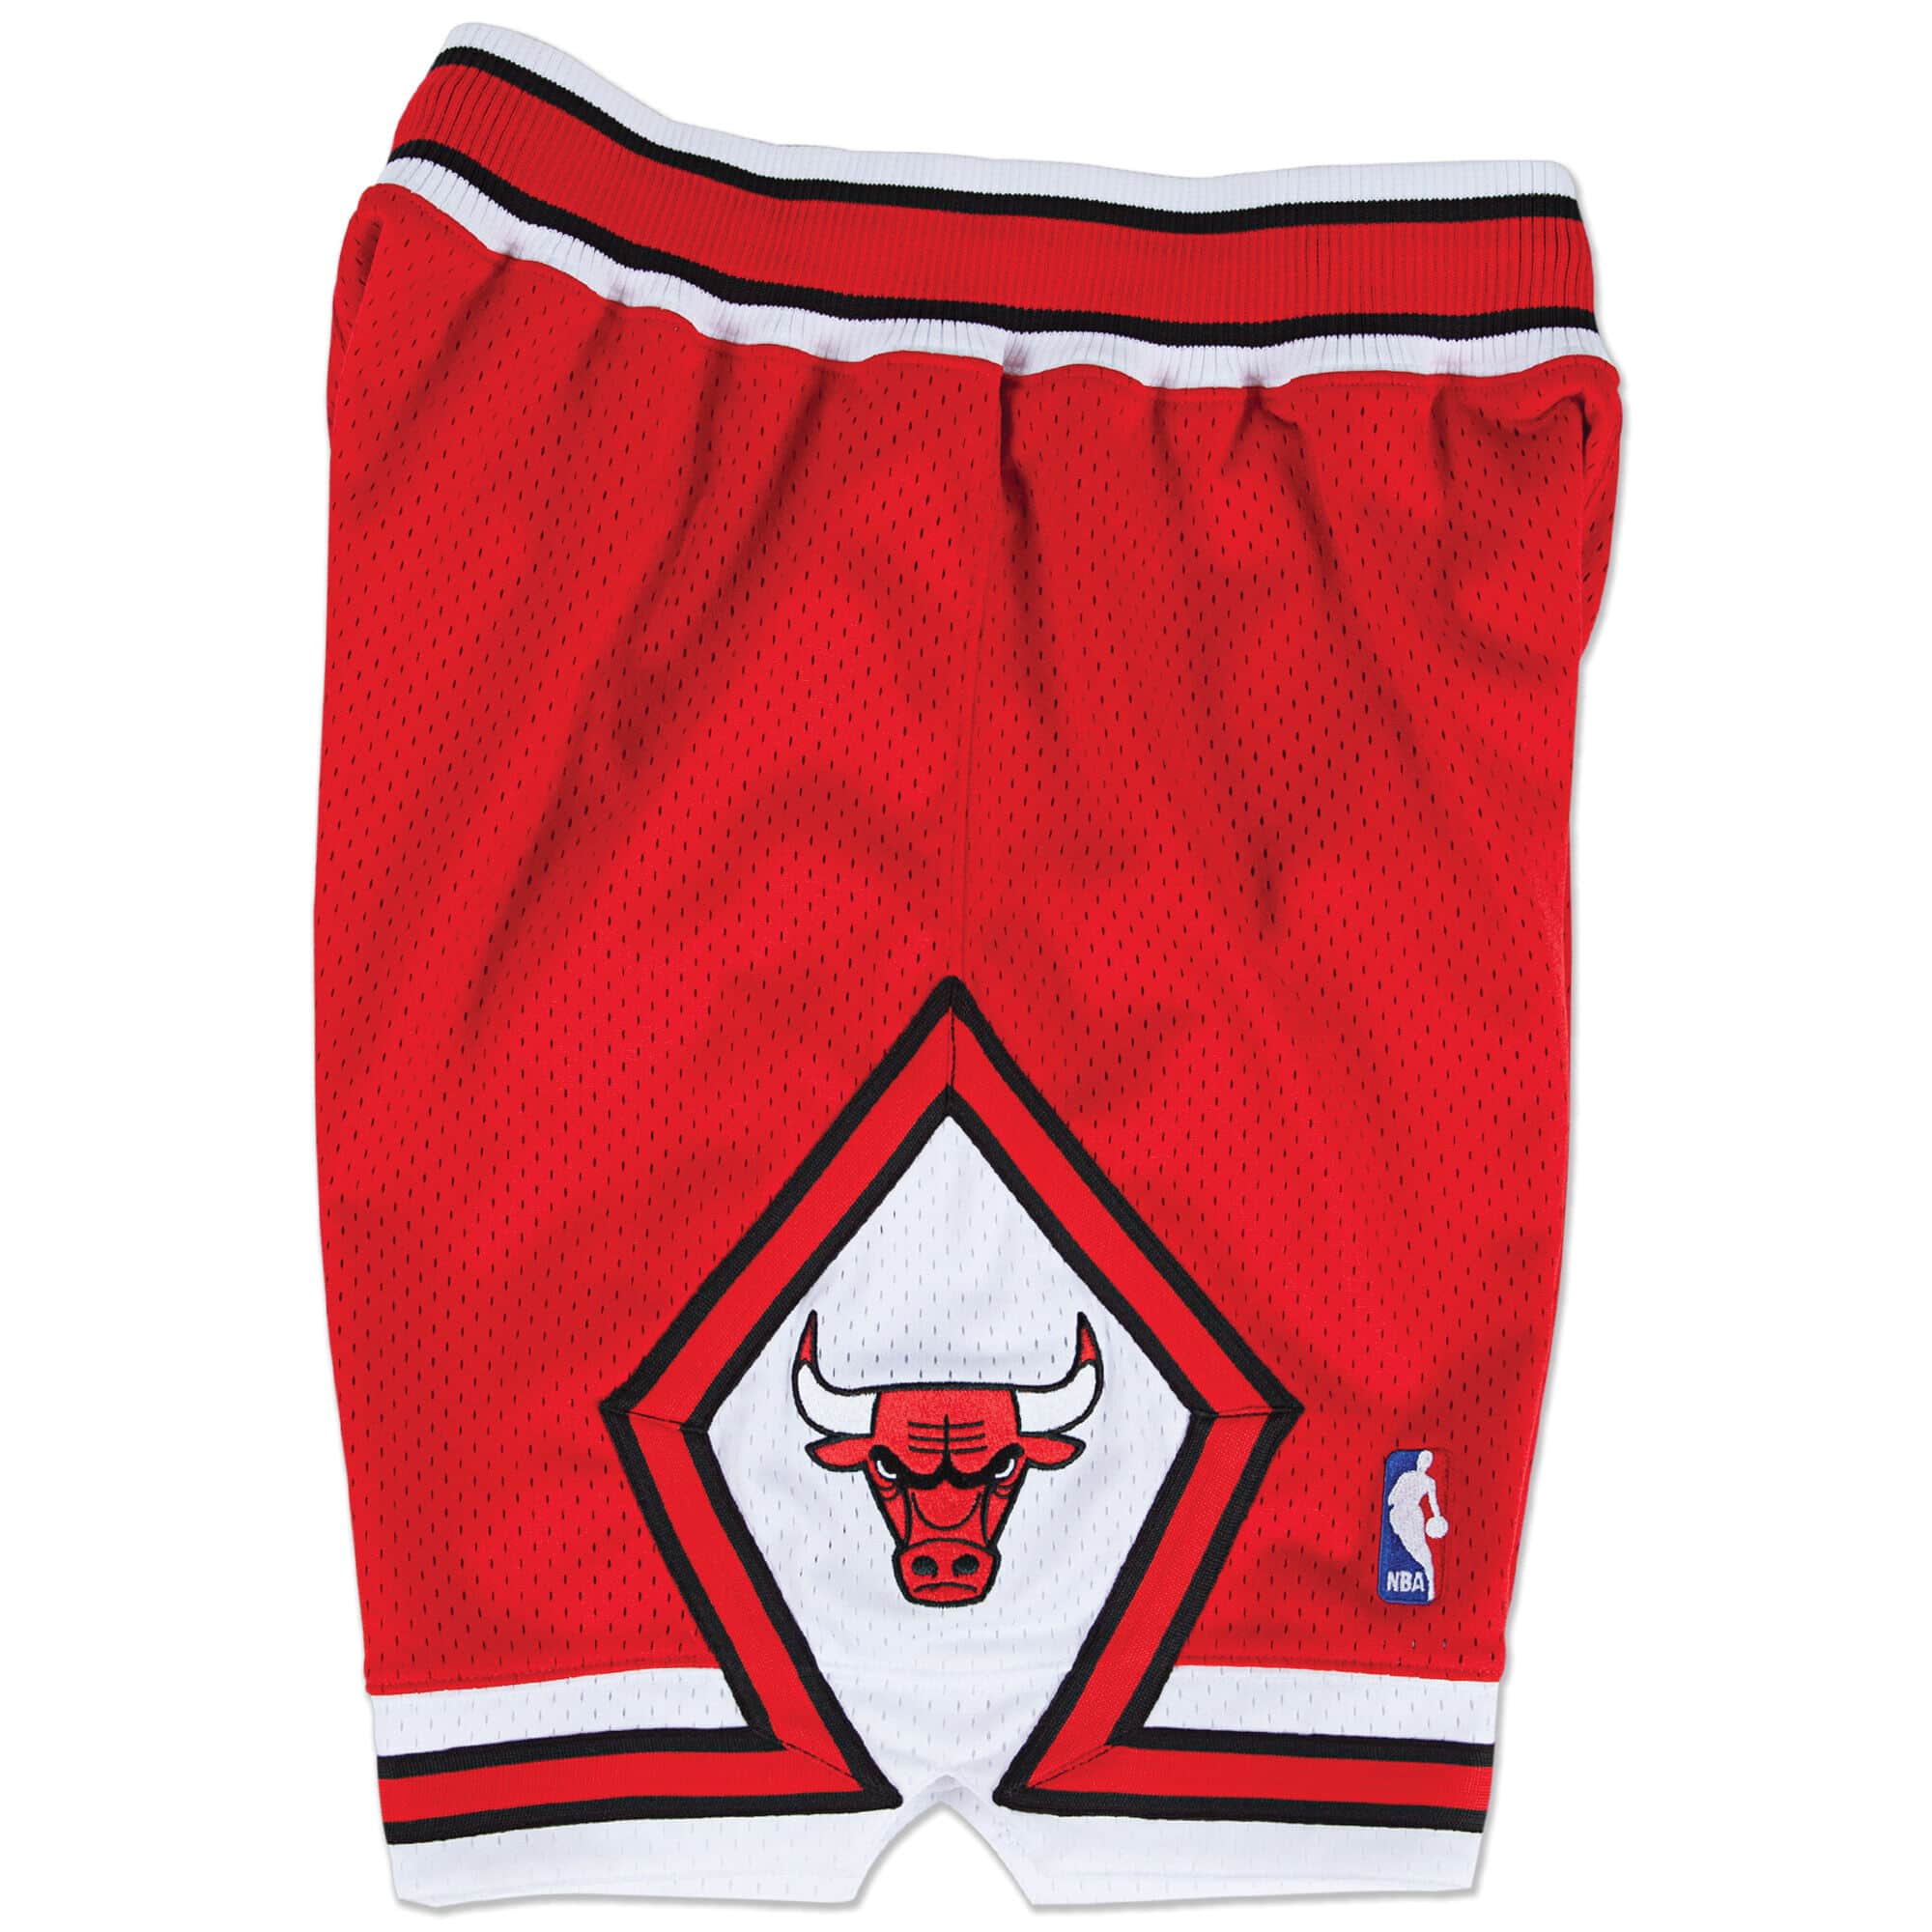 official chicago bulls shorts